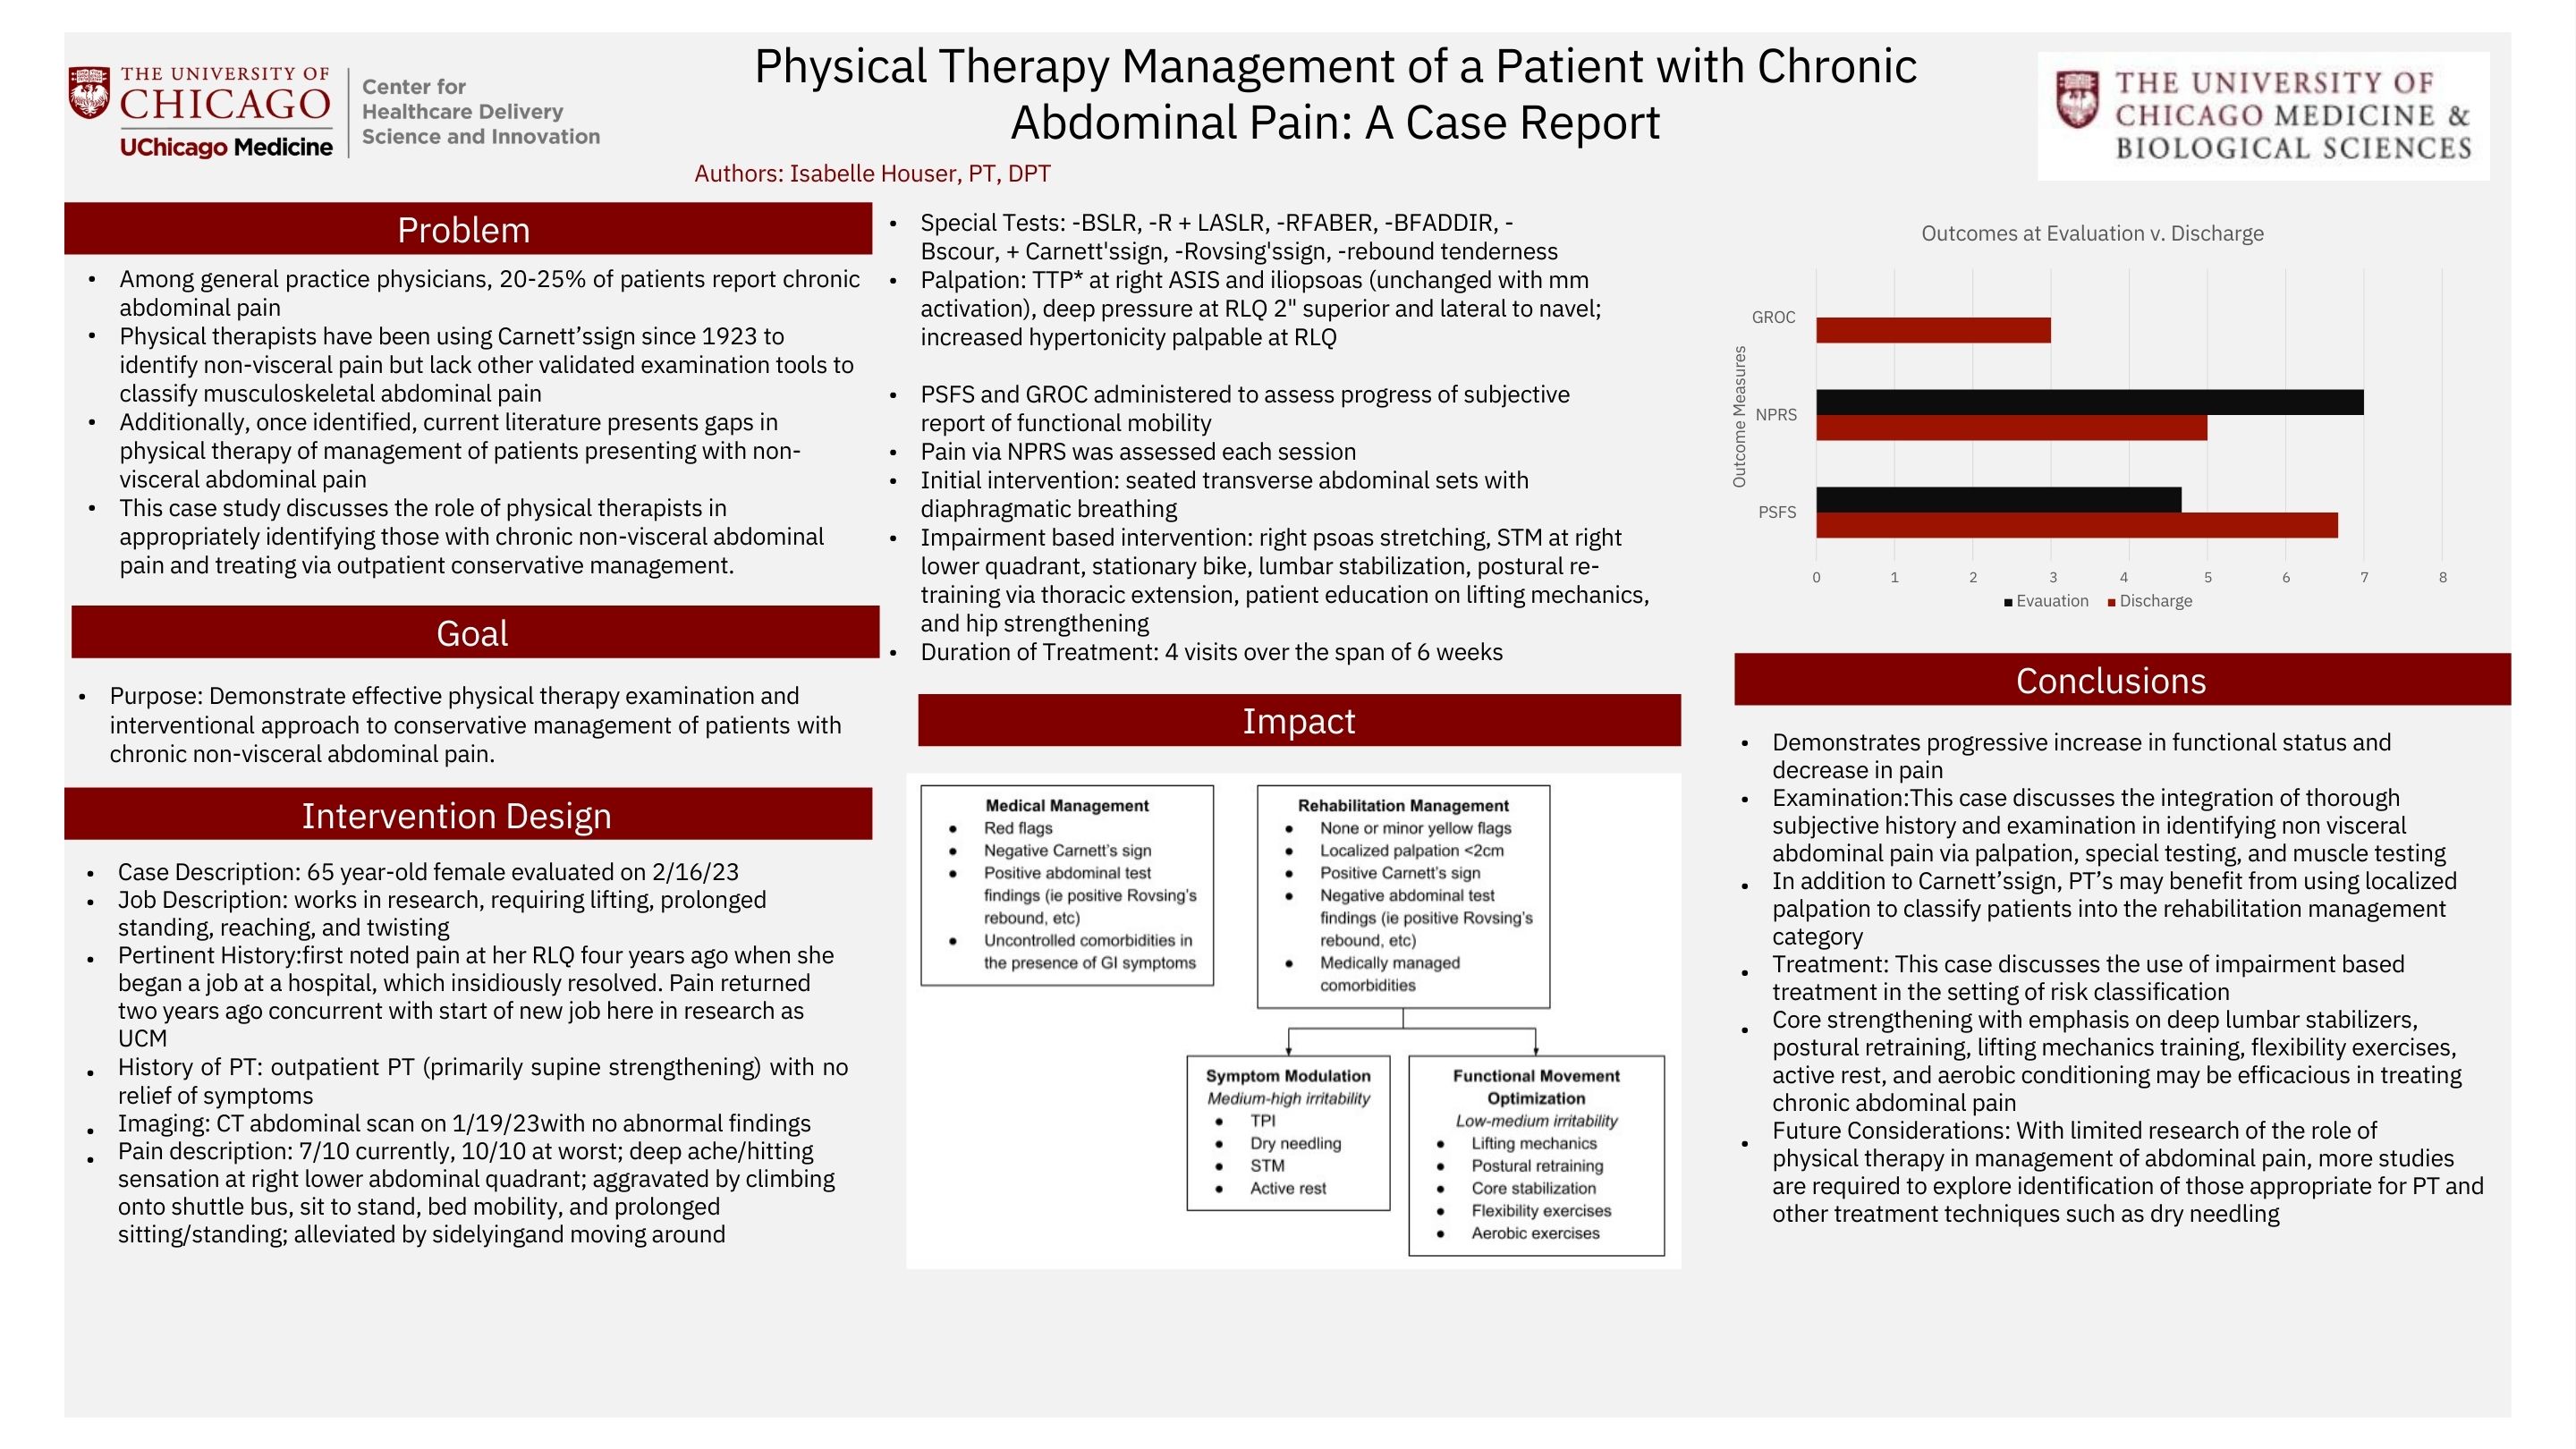 HOUSER_Physical-Therapy-Management-of-a-Patient-with-Chronic-Abdominal-Pain-A-Case-Report